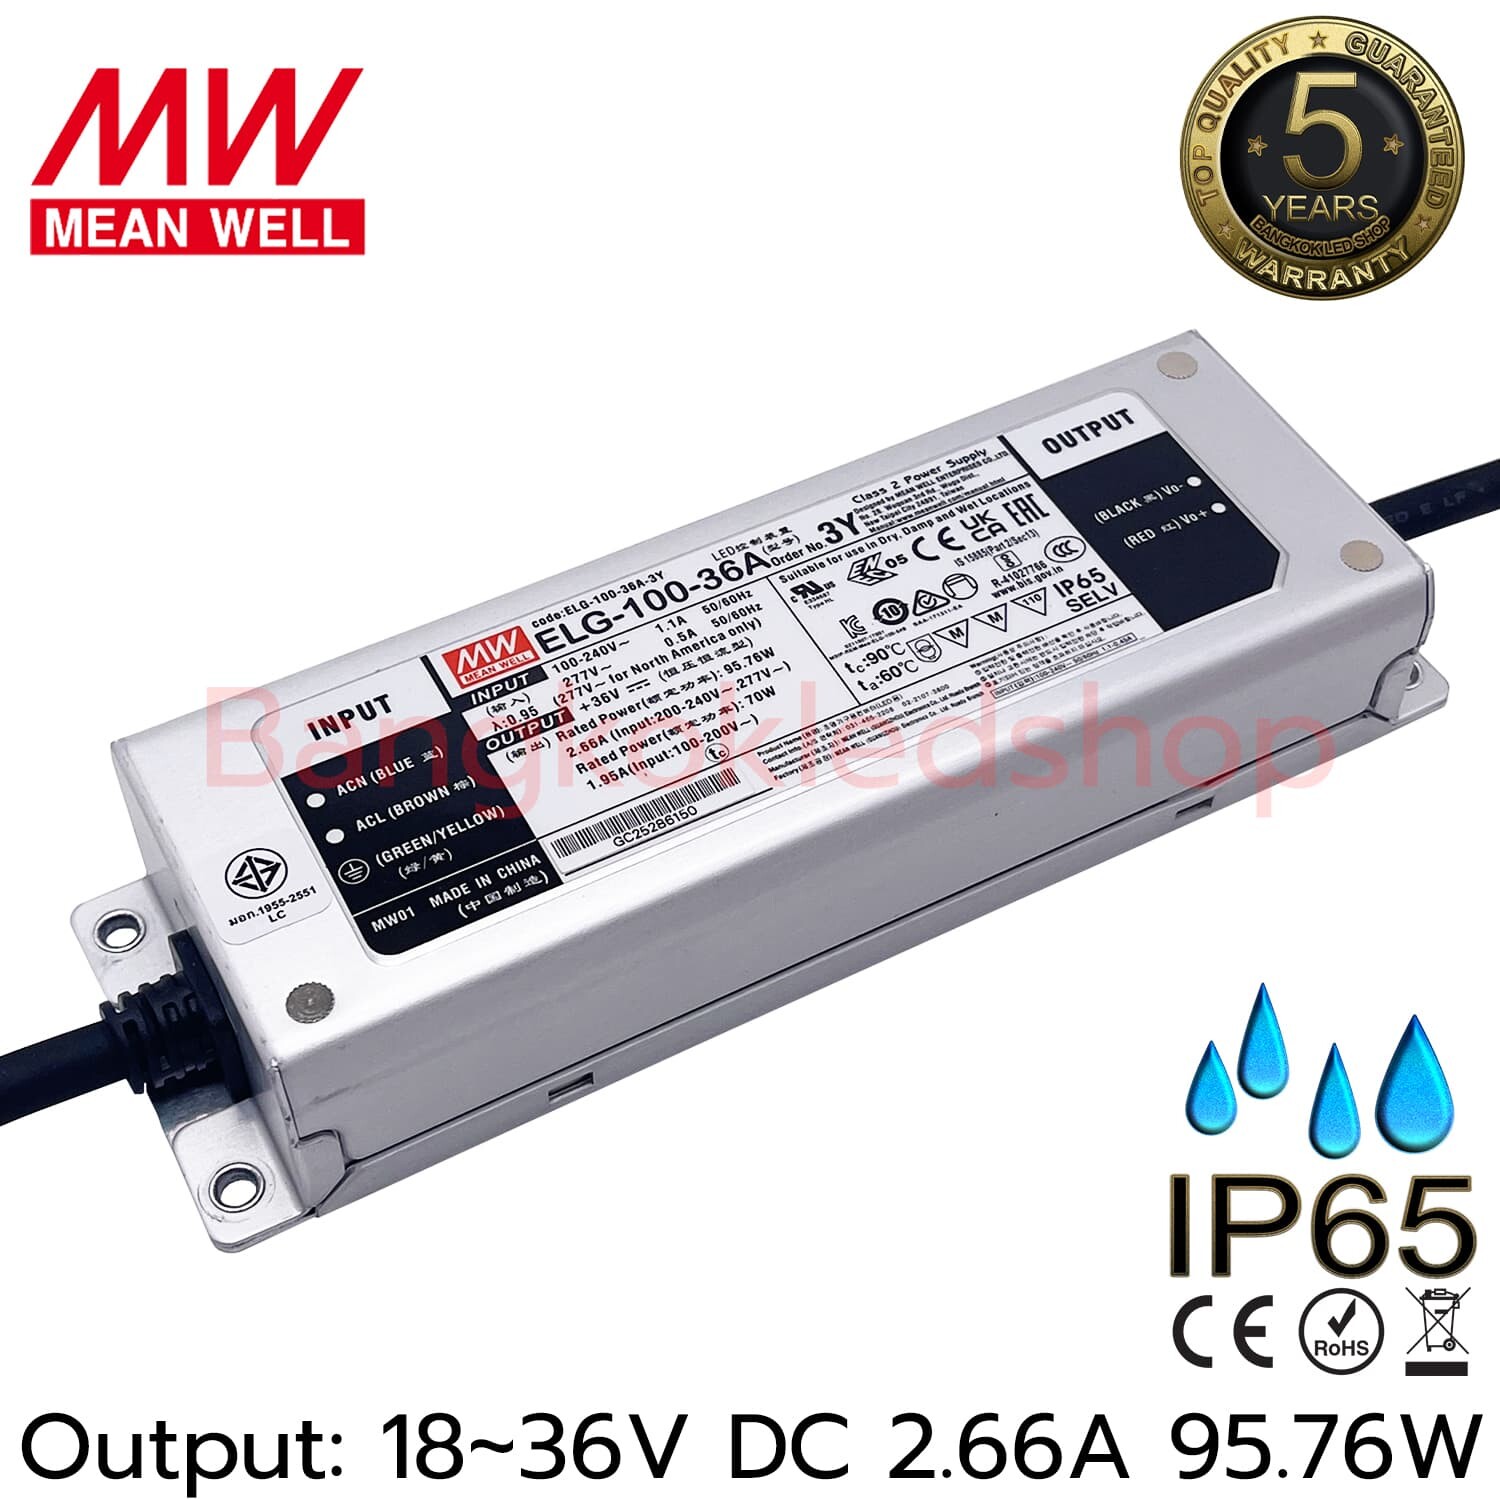 ELG-100-36A Mean Well  Mean Well LED Driver, 36V Output, 100W